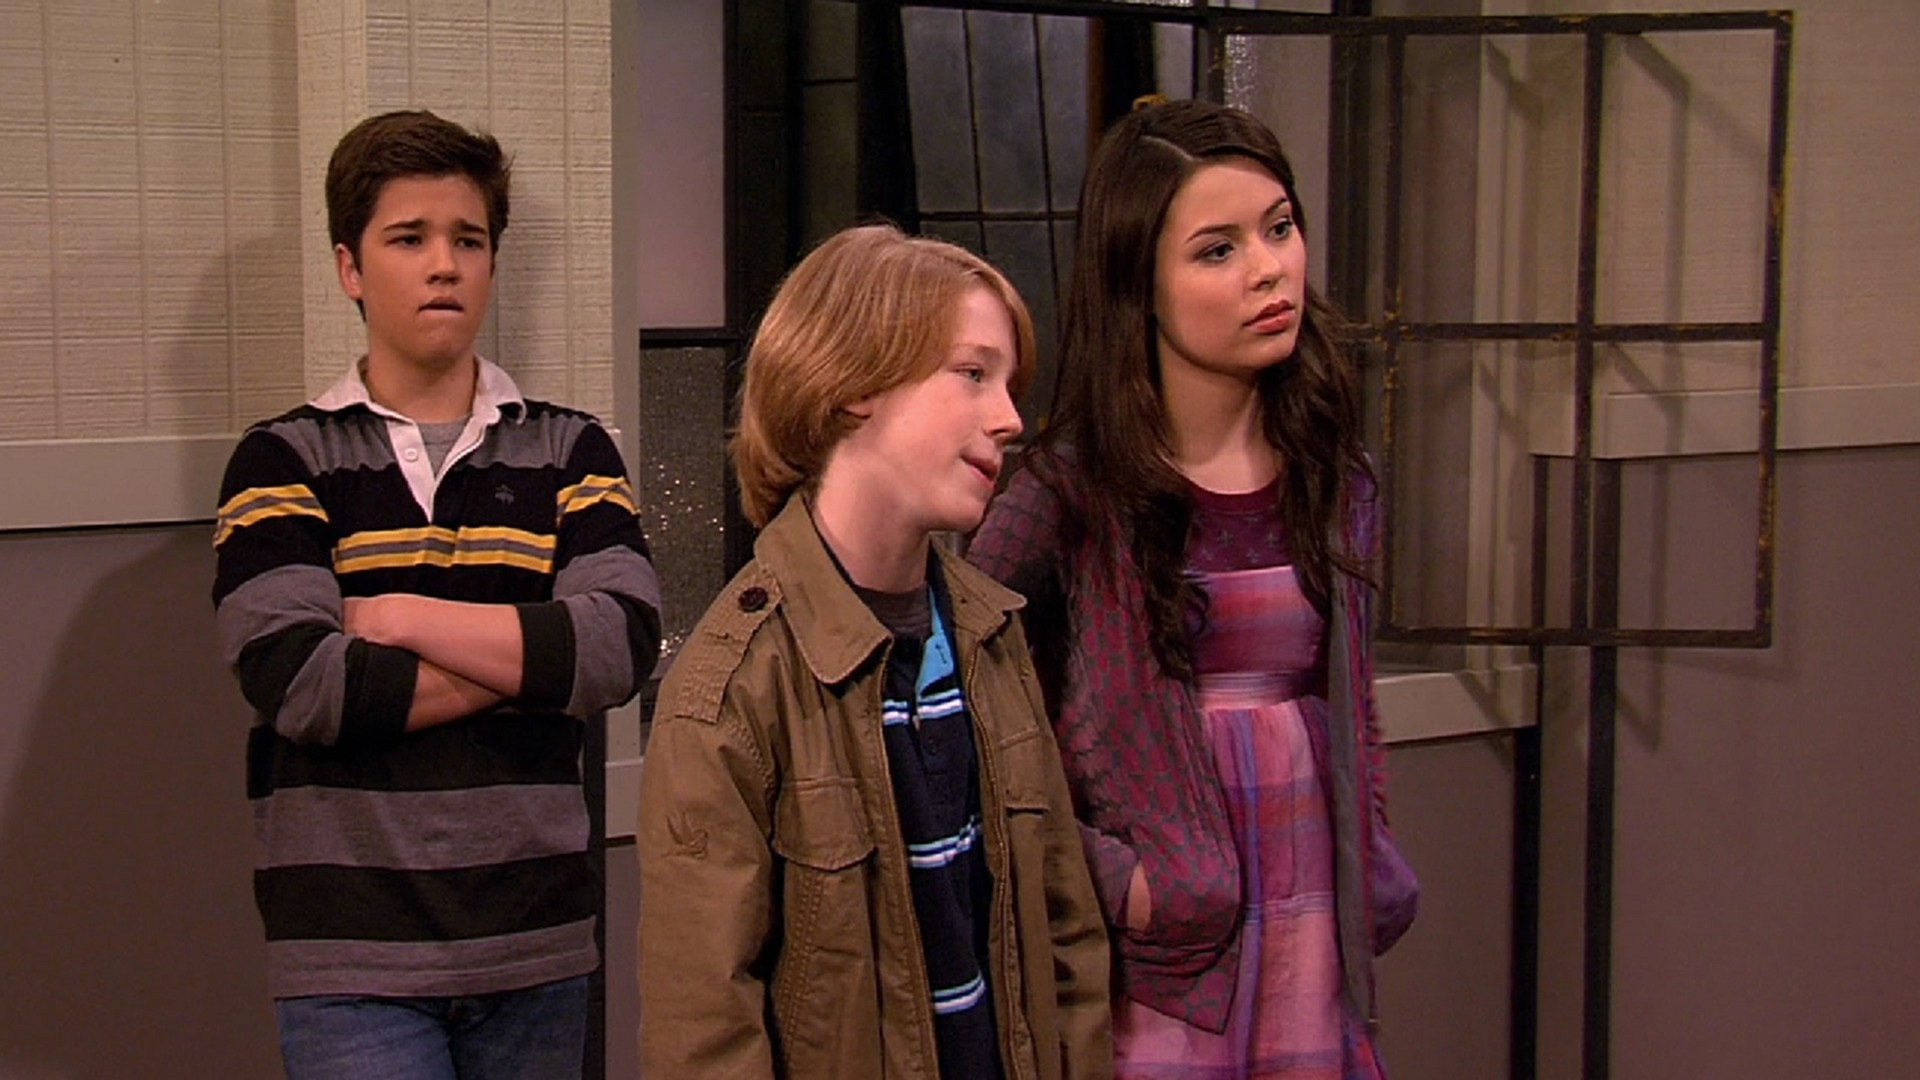 iCarly TV show, Funny moments, Fan-made images, Free photos, 1920x1080 Full HD Desktop